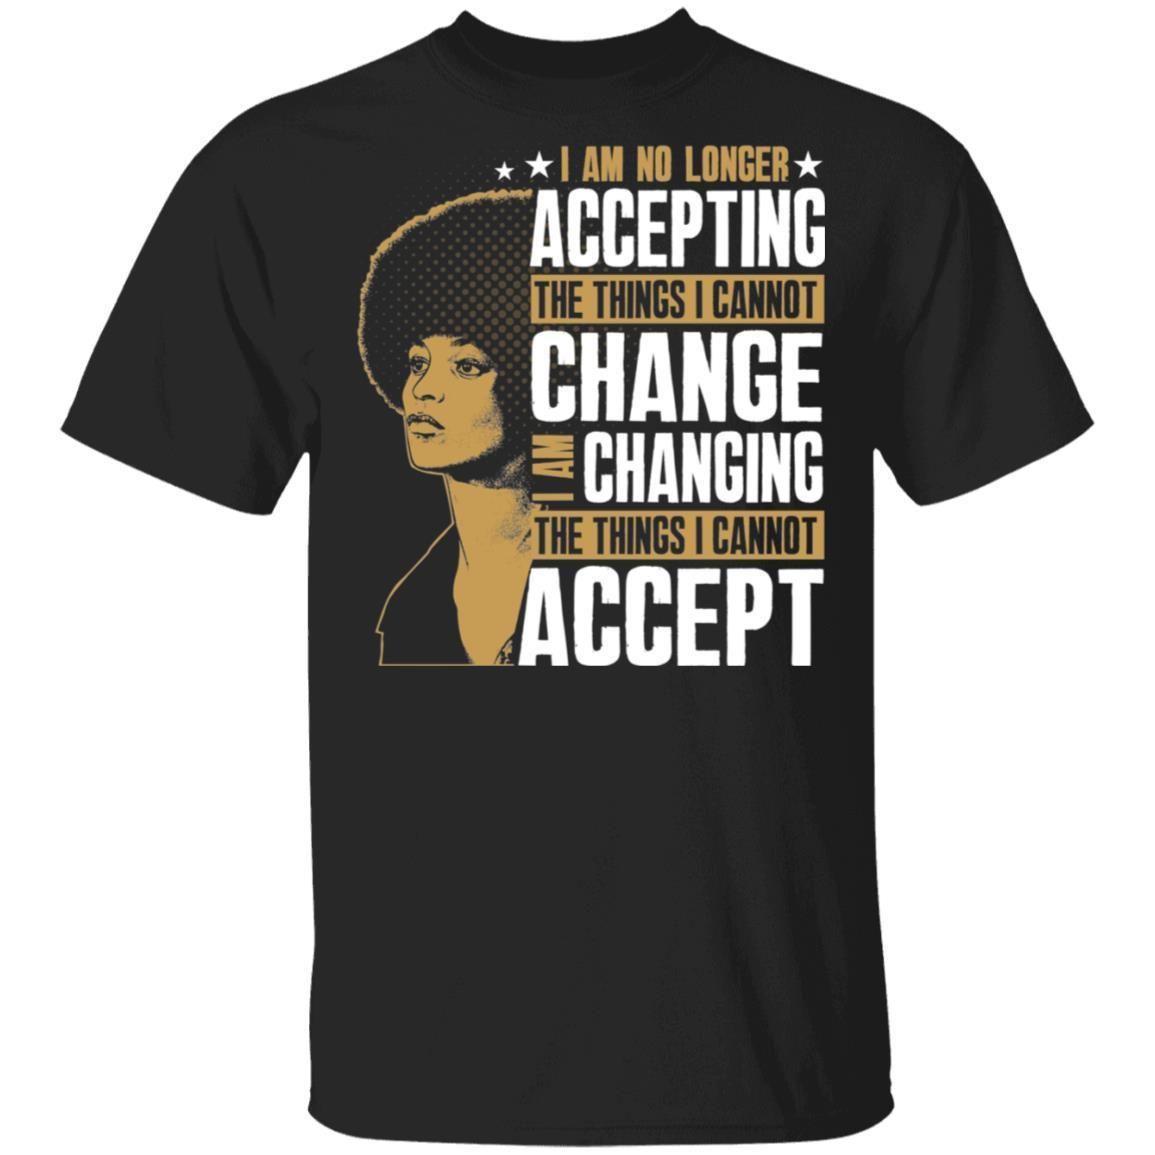 I_m Changing The Things I Cannot Accept T-shirt PAN2TS0243